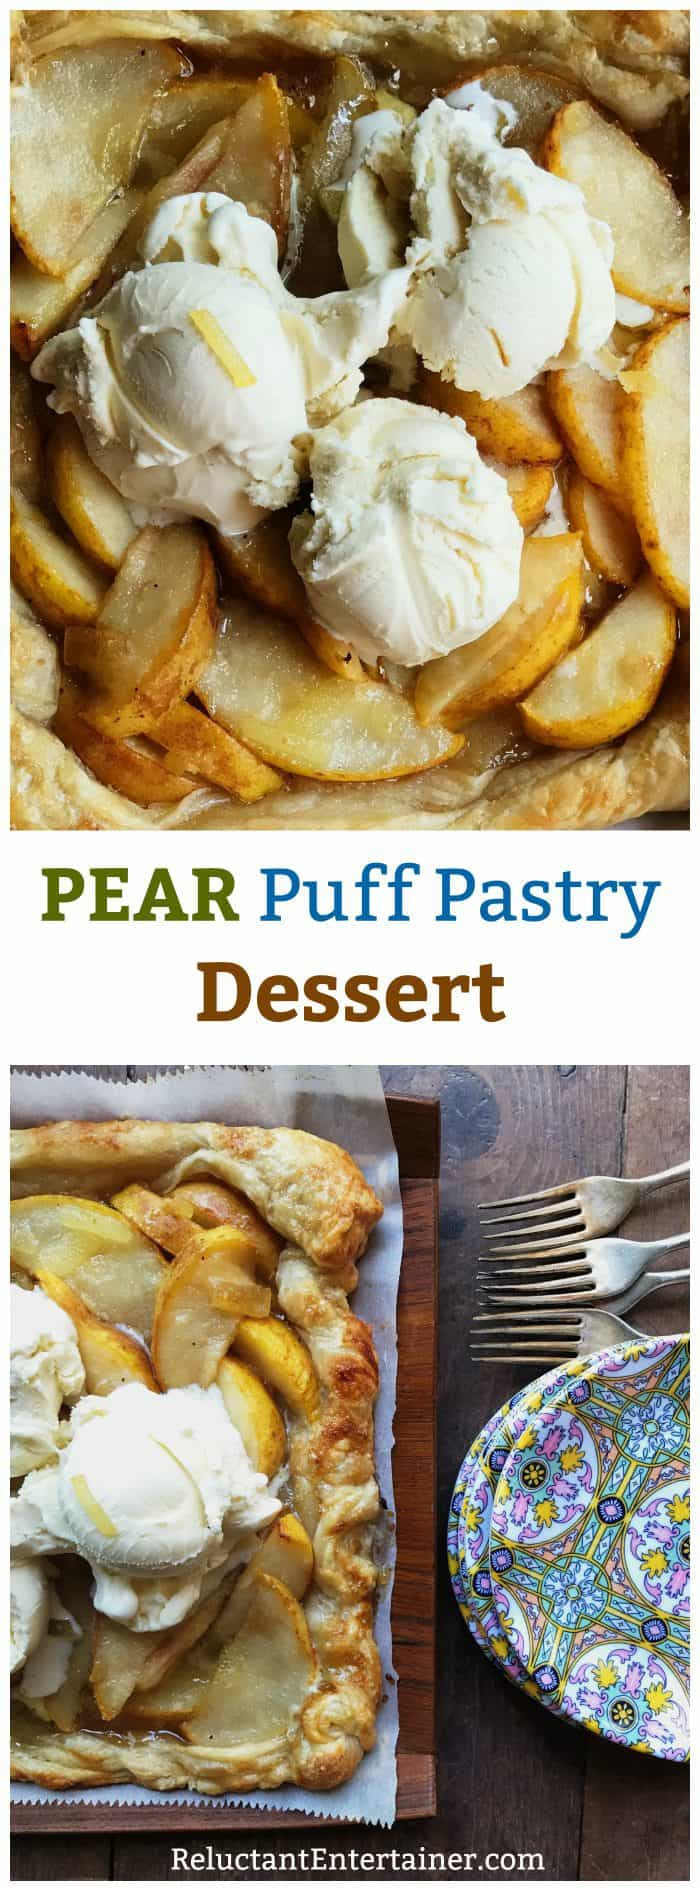 Puffed Pastry Recipes Desserts
 Pear Puff Pastry Dessert Recipe Reluctant Entertainer